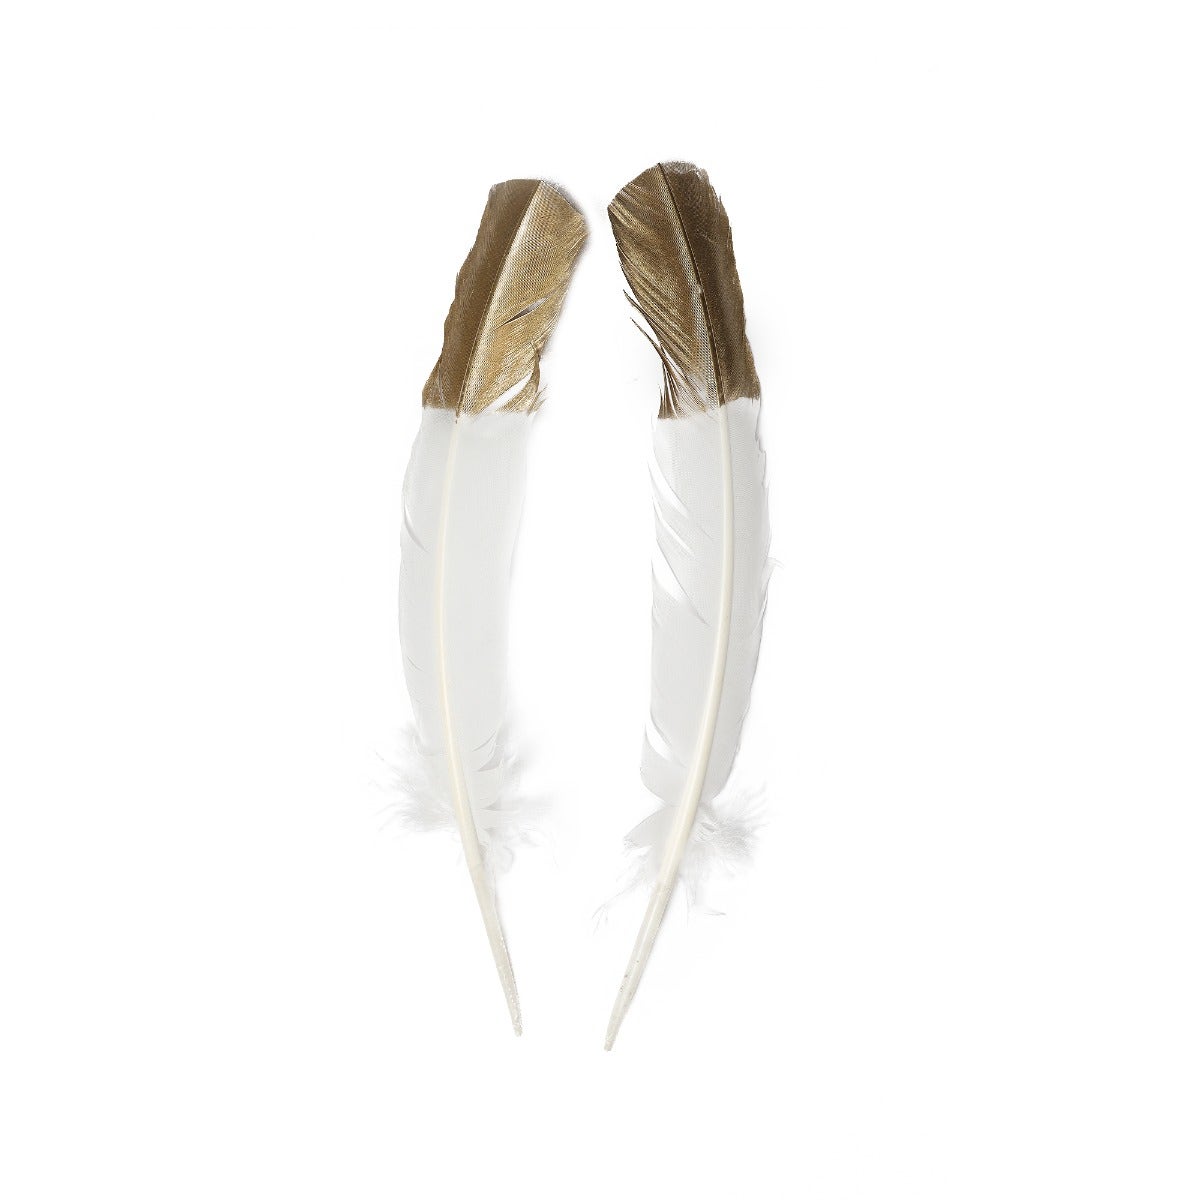 Metallic Gold Tipped White Turkey Quill Feathers 10-12" - 2 PC